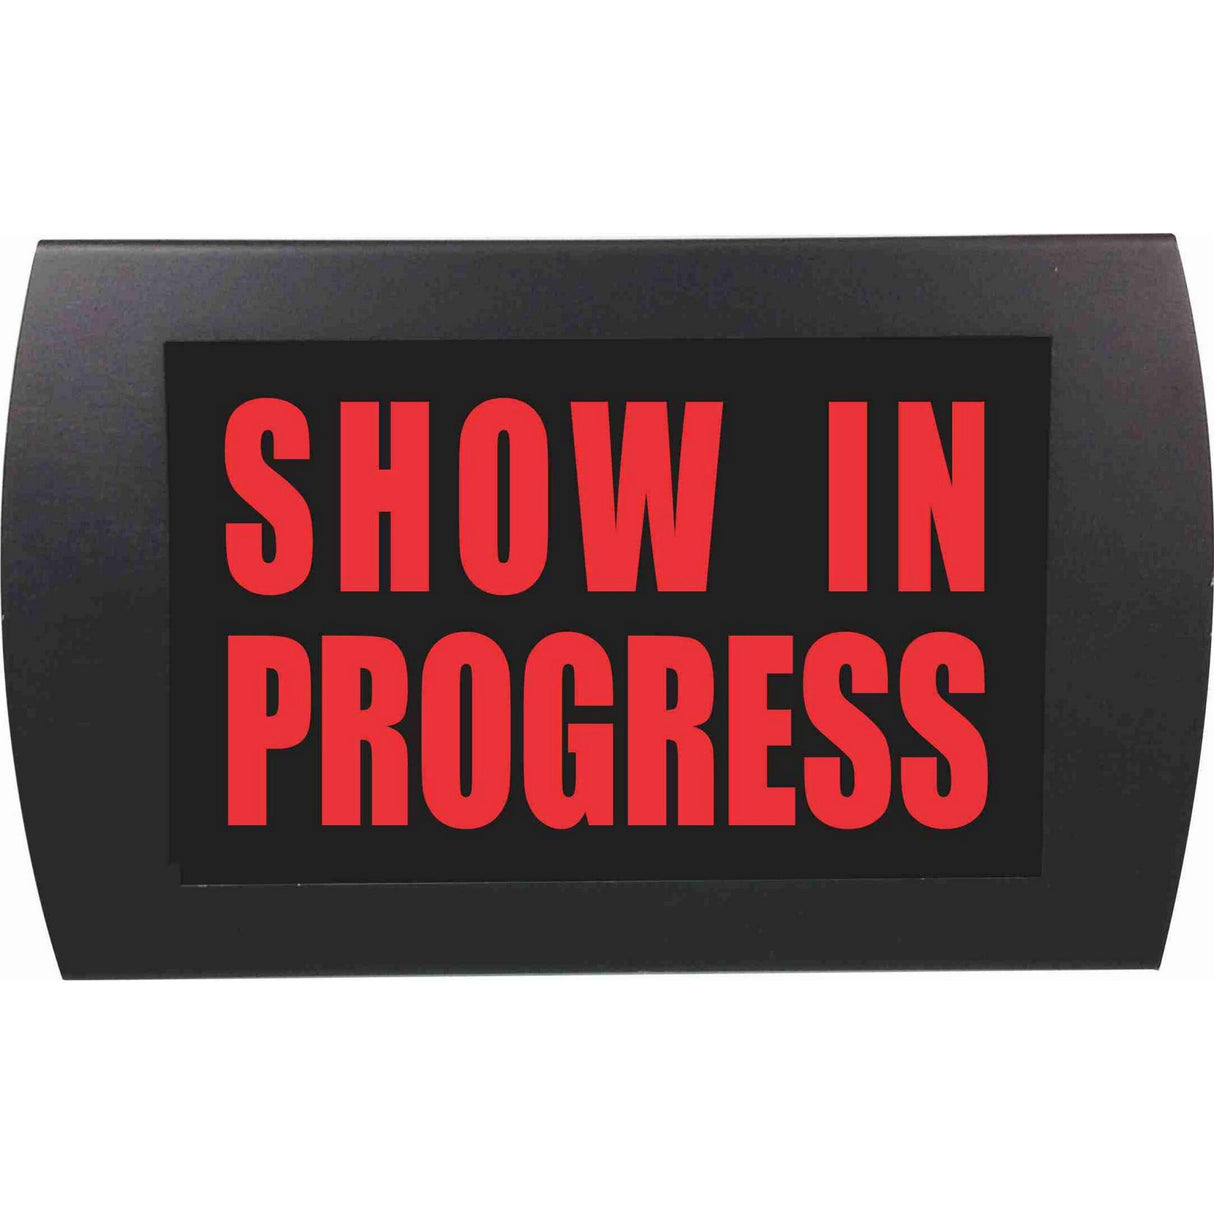 American Recorder OAS-2031M-RD "SHOW IN PROGRESS" LED Lighted Sign, Red